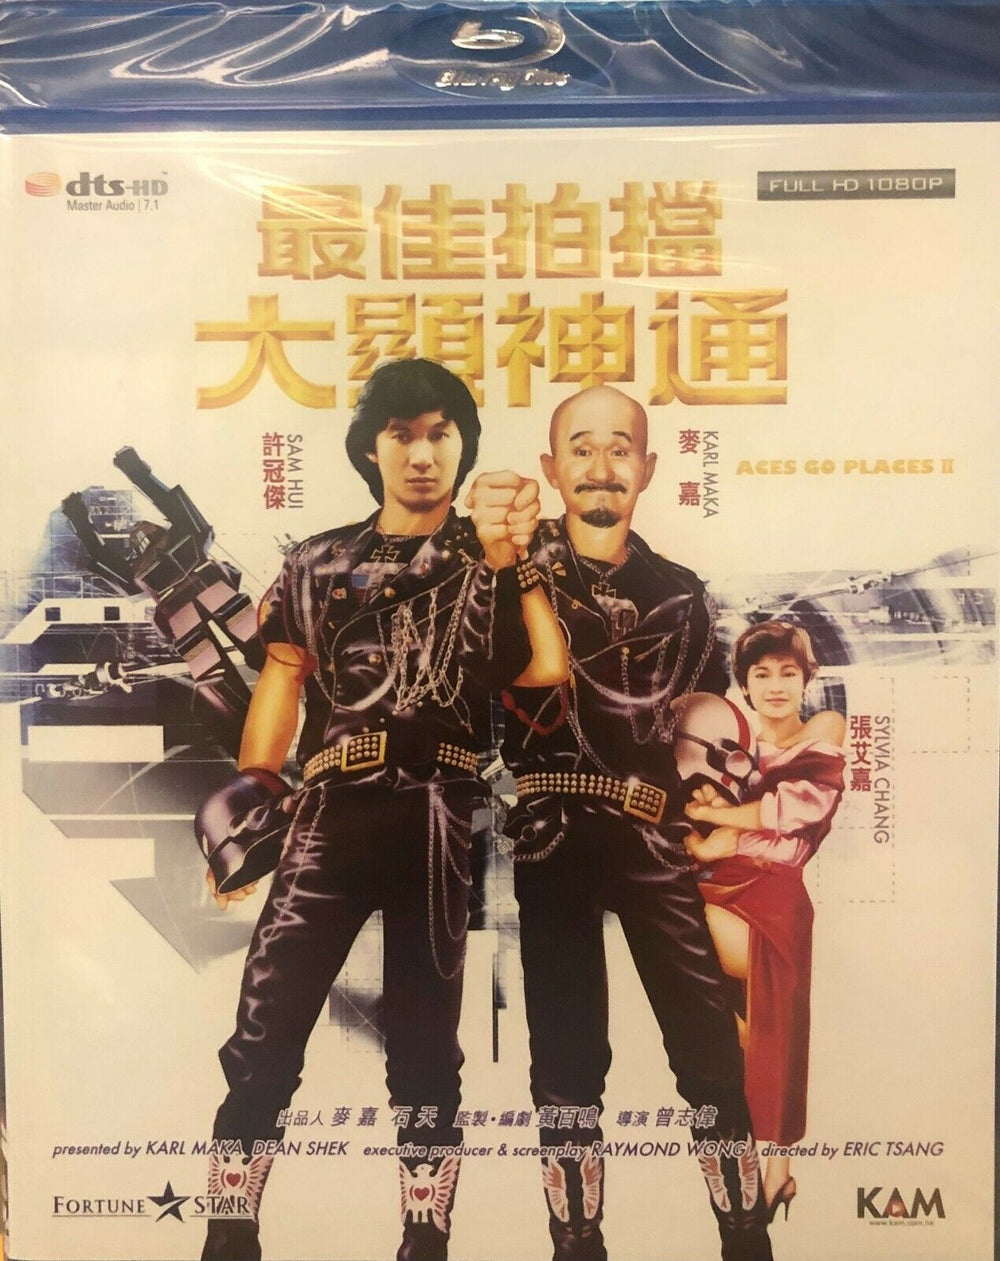 Aces Go Places II 最佳拍檔之大顯神通 1983 (H.K Movie) BLU-RAY with Eng Sub (Region A)